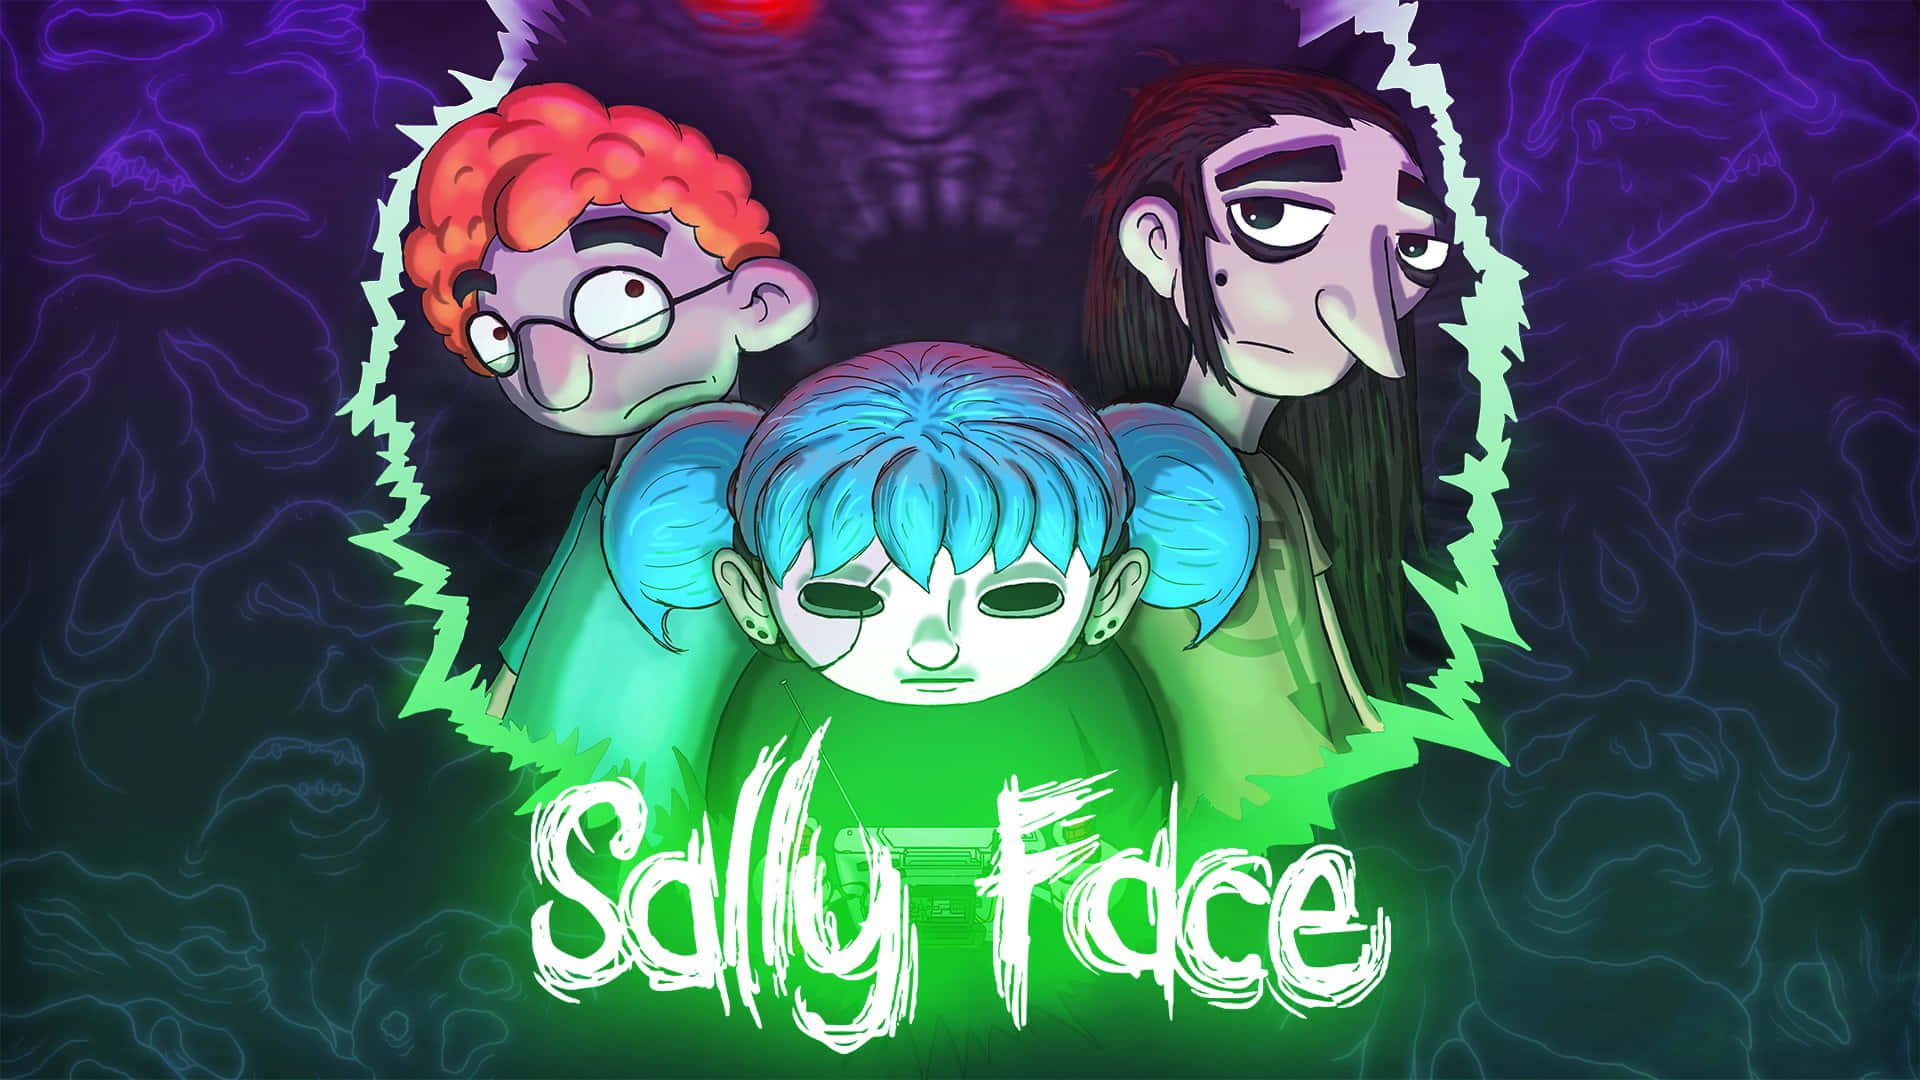 A mysterious and engaging Sally Face wallpaper featuring Sal Fisher in his iconic mask and eerie environment.